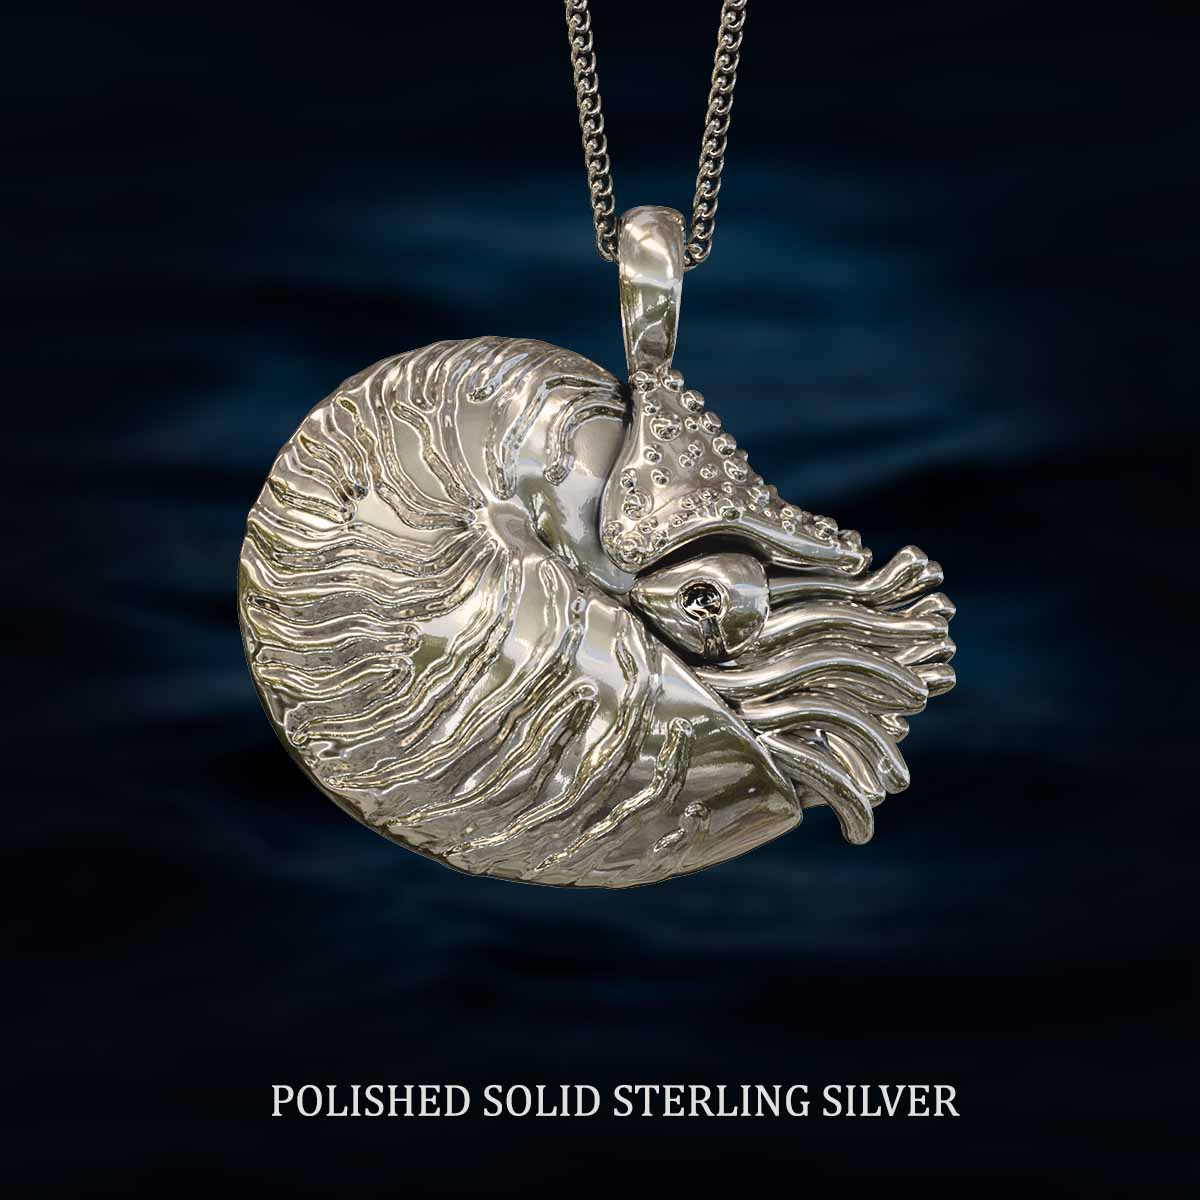     Polished-Solid-Sterling-Silver-Nautilus-Pendant-Jewelry-For-Necklace